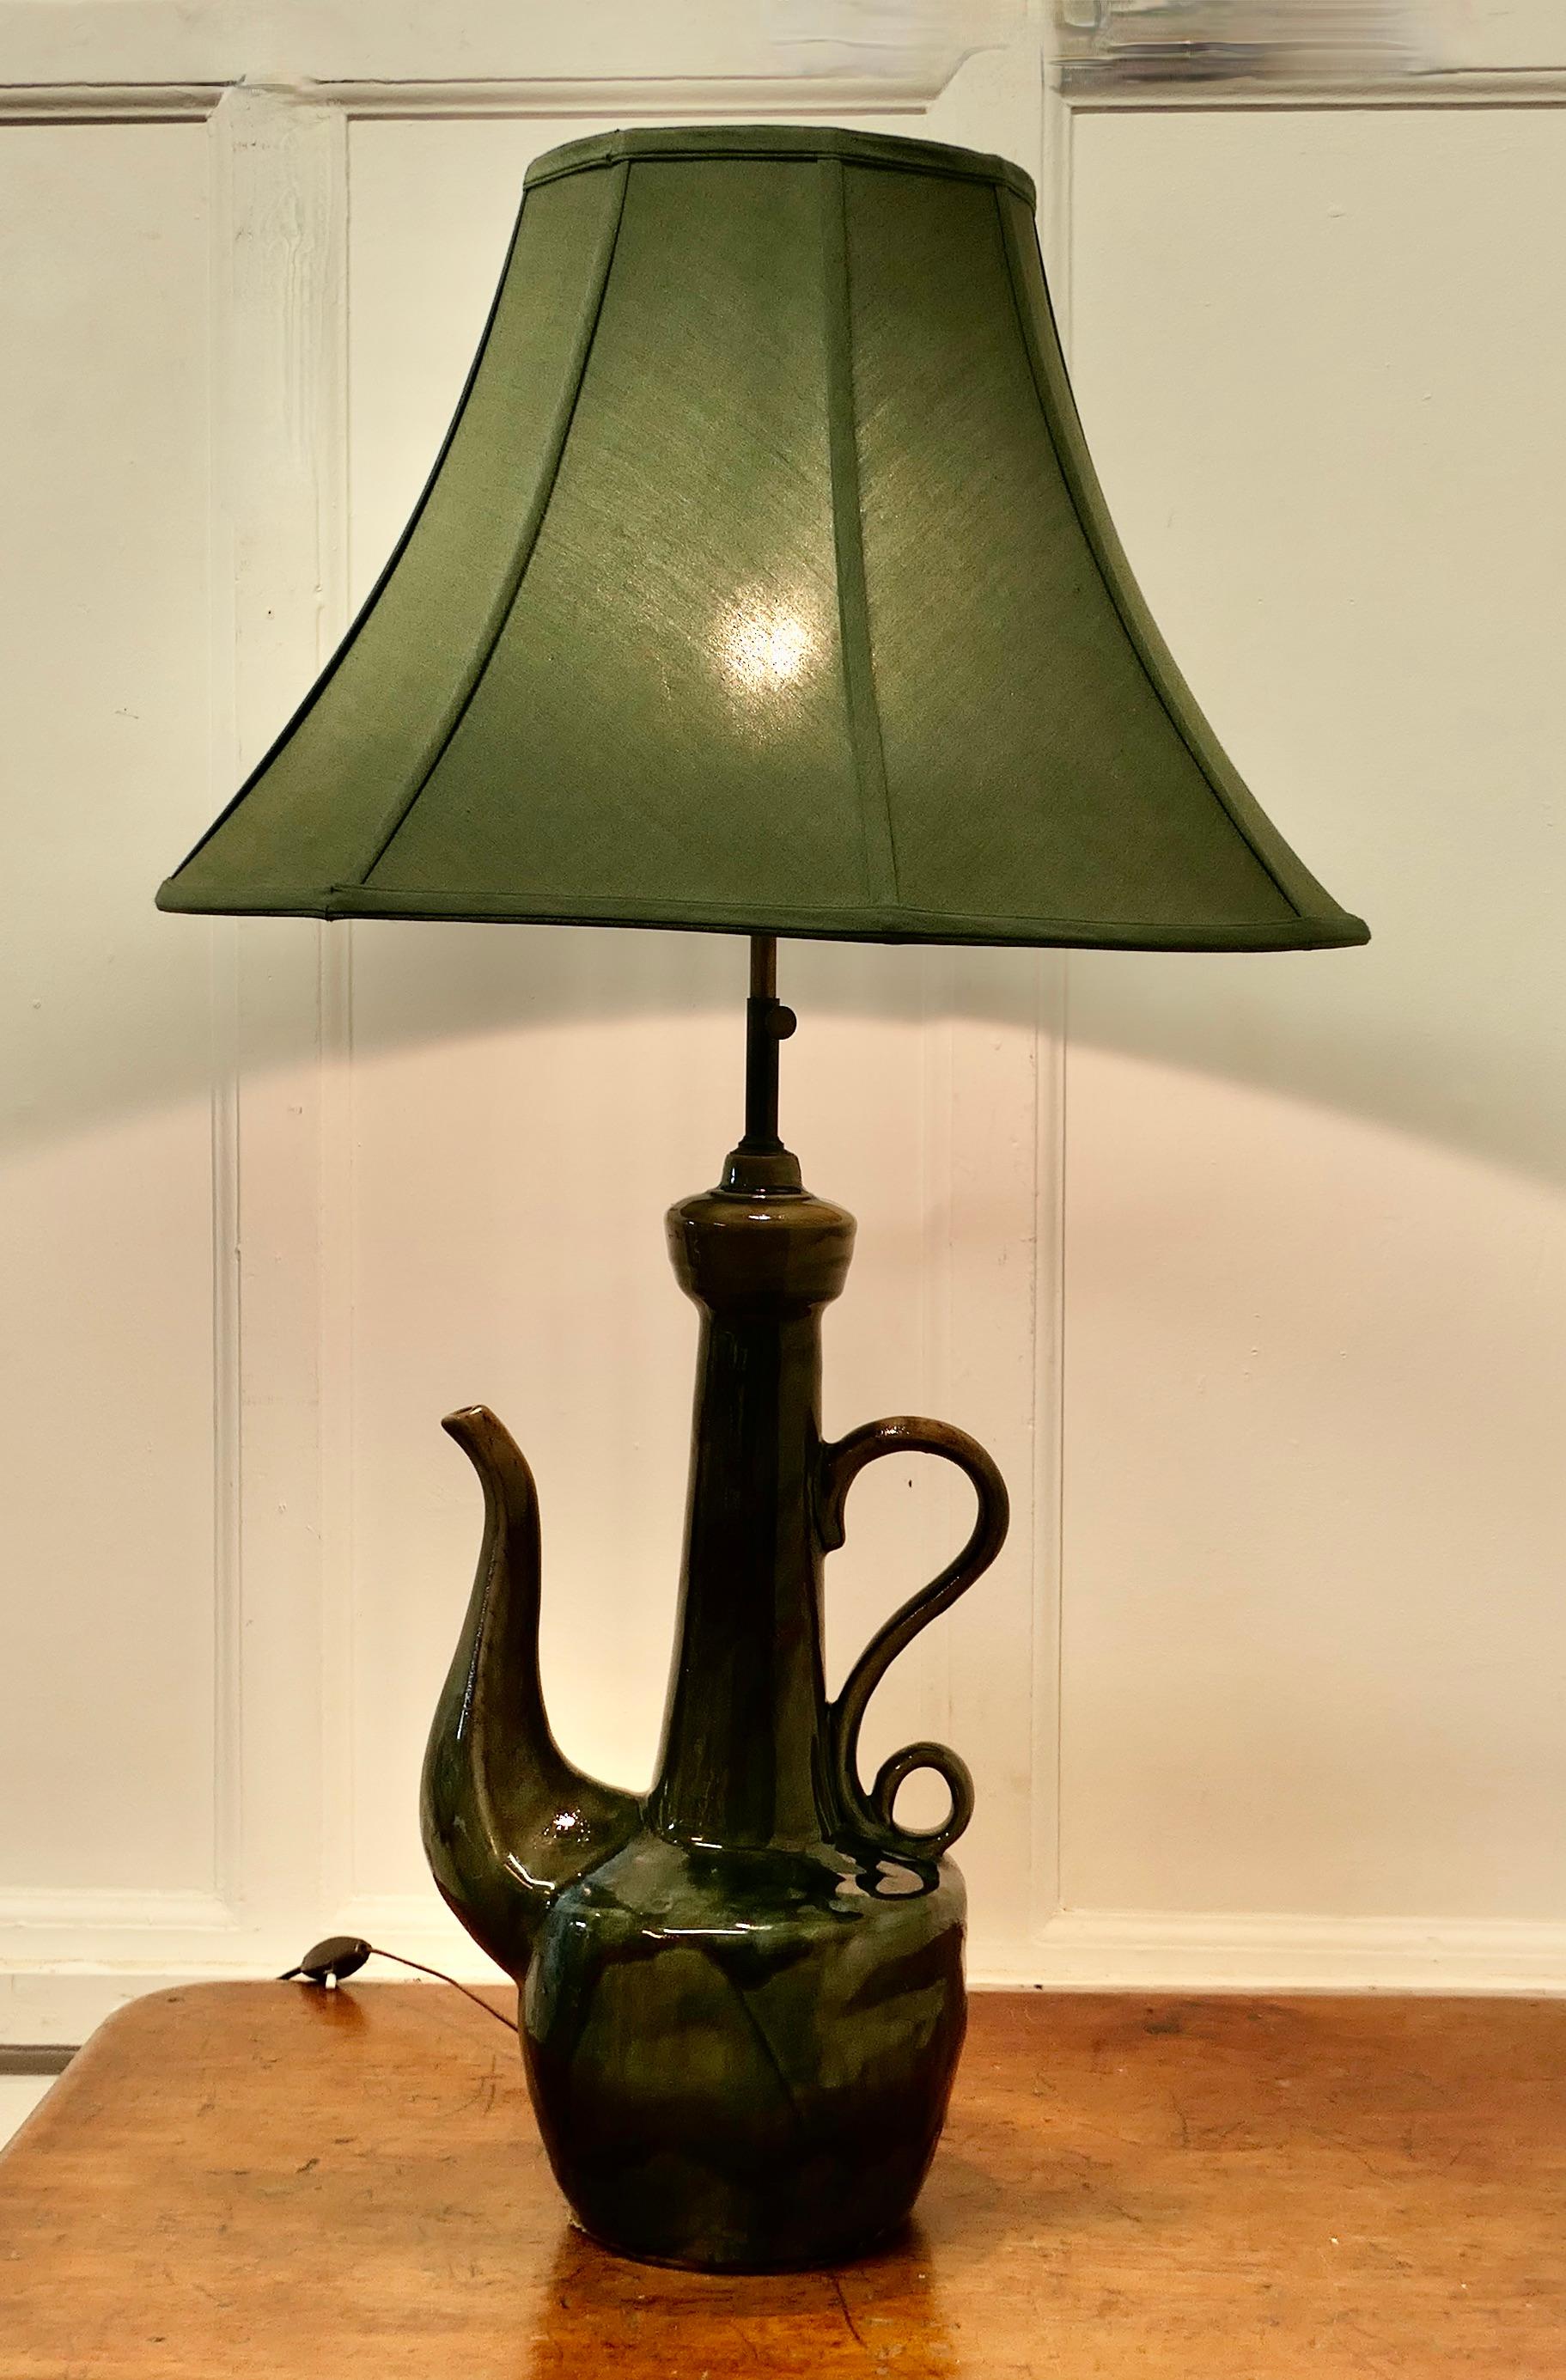 Large Arts and Crafts Quirky Tea Pot Table Lamp
 
Made as a Table Lamp, this quirky piece has an  Art Pottery base, very much in the style of, and possibly by Bretby in green with a majolica glaze
The lamp has a height adjustable central column
The